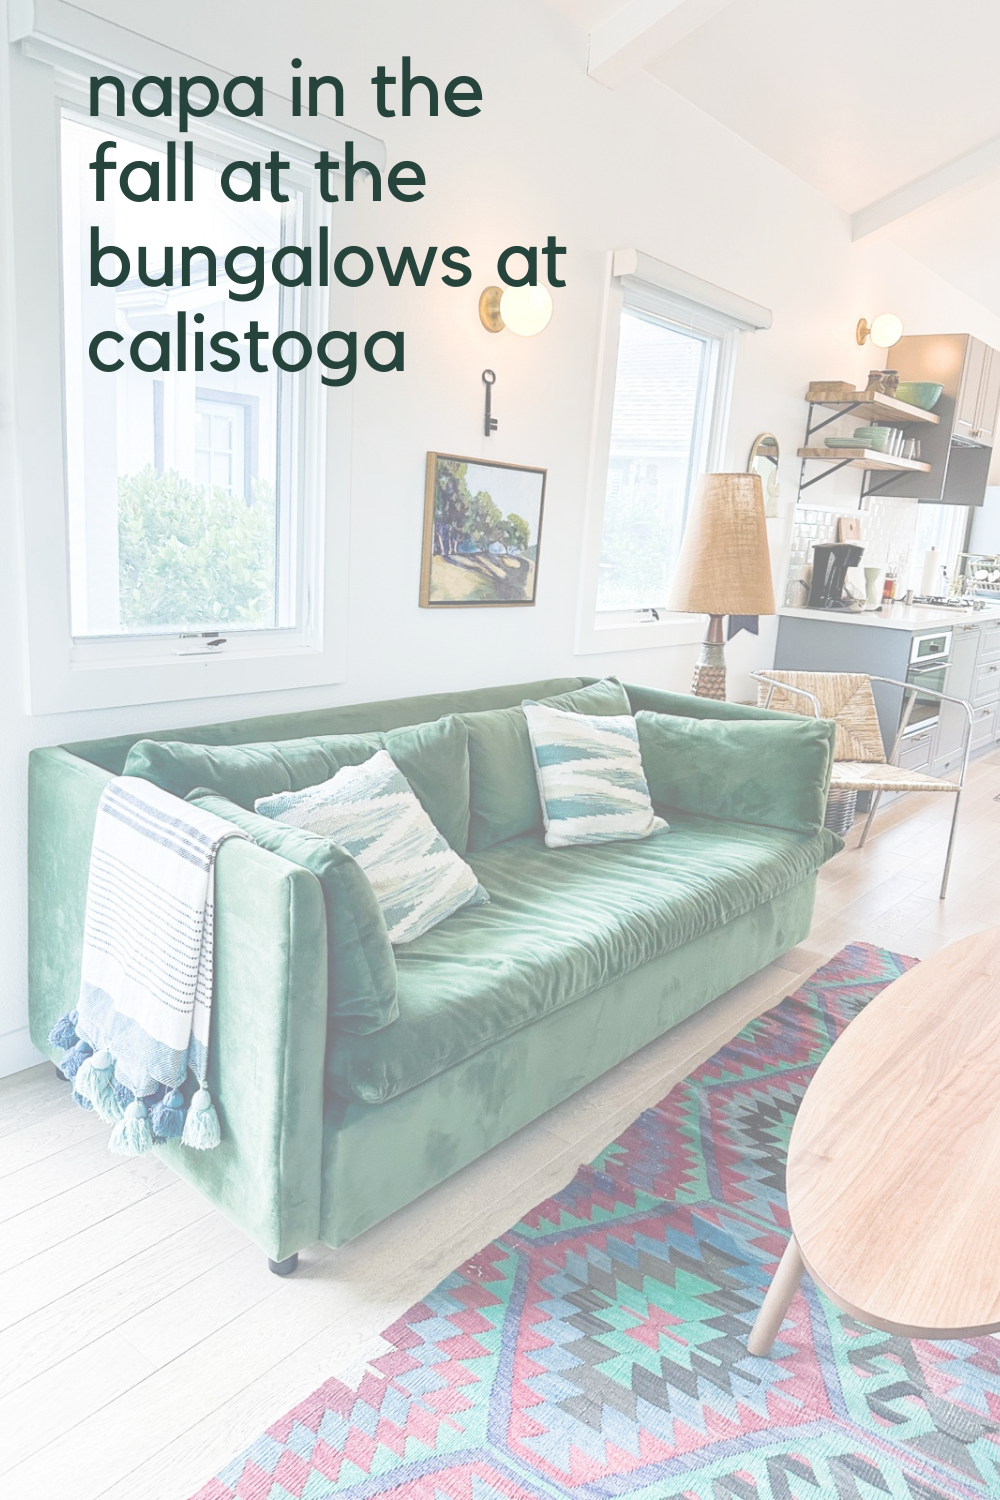 the bungalows at calistoga, bungalow b, where to stay near napa valley, lments of style, travel blogger, la blogger